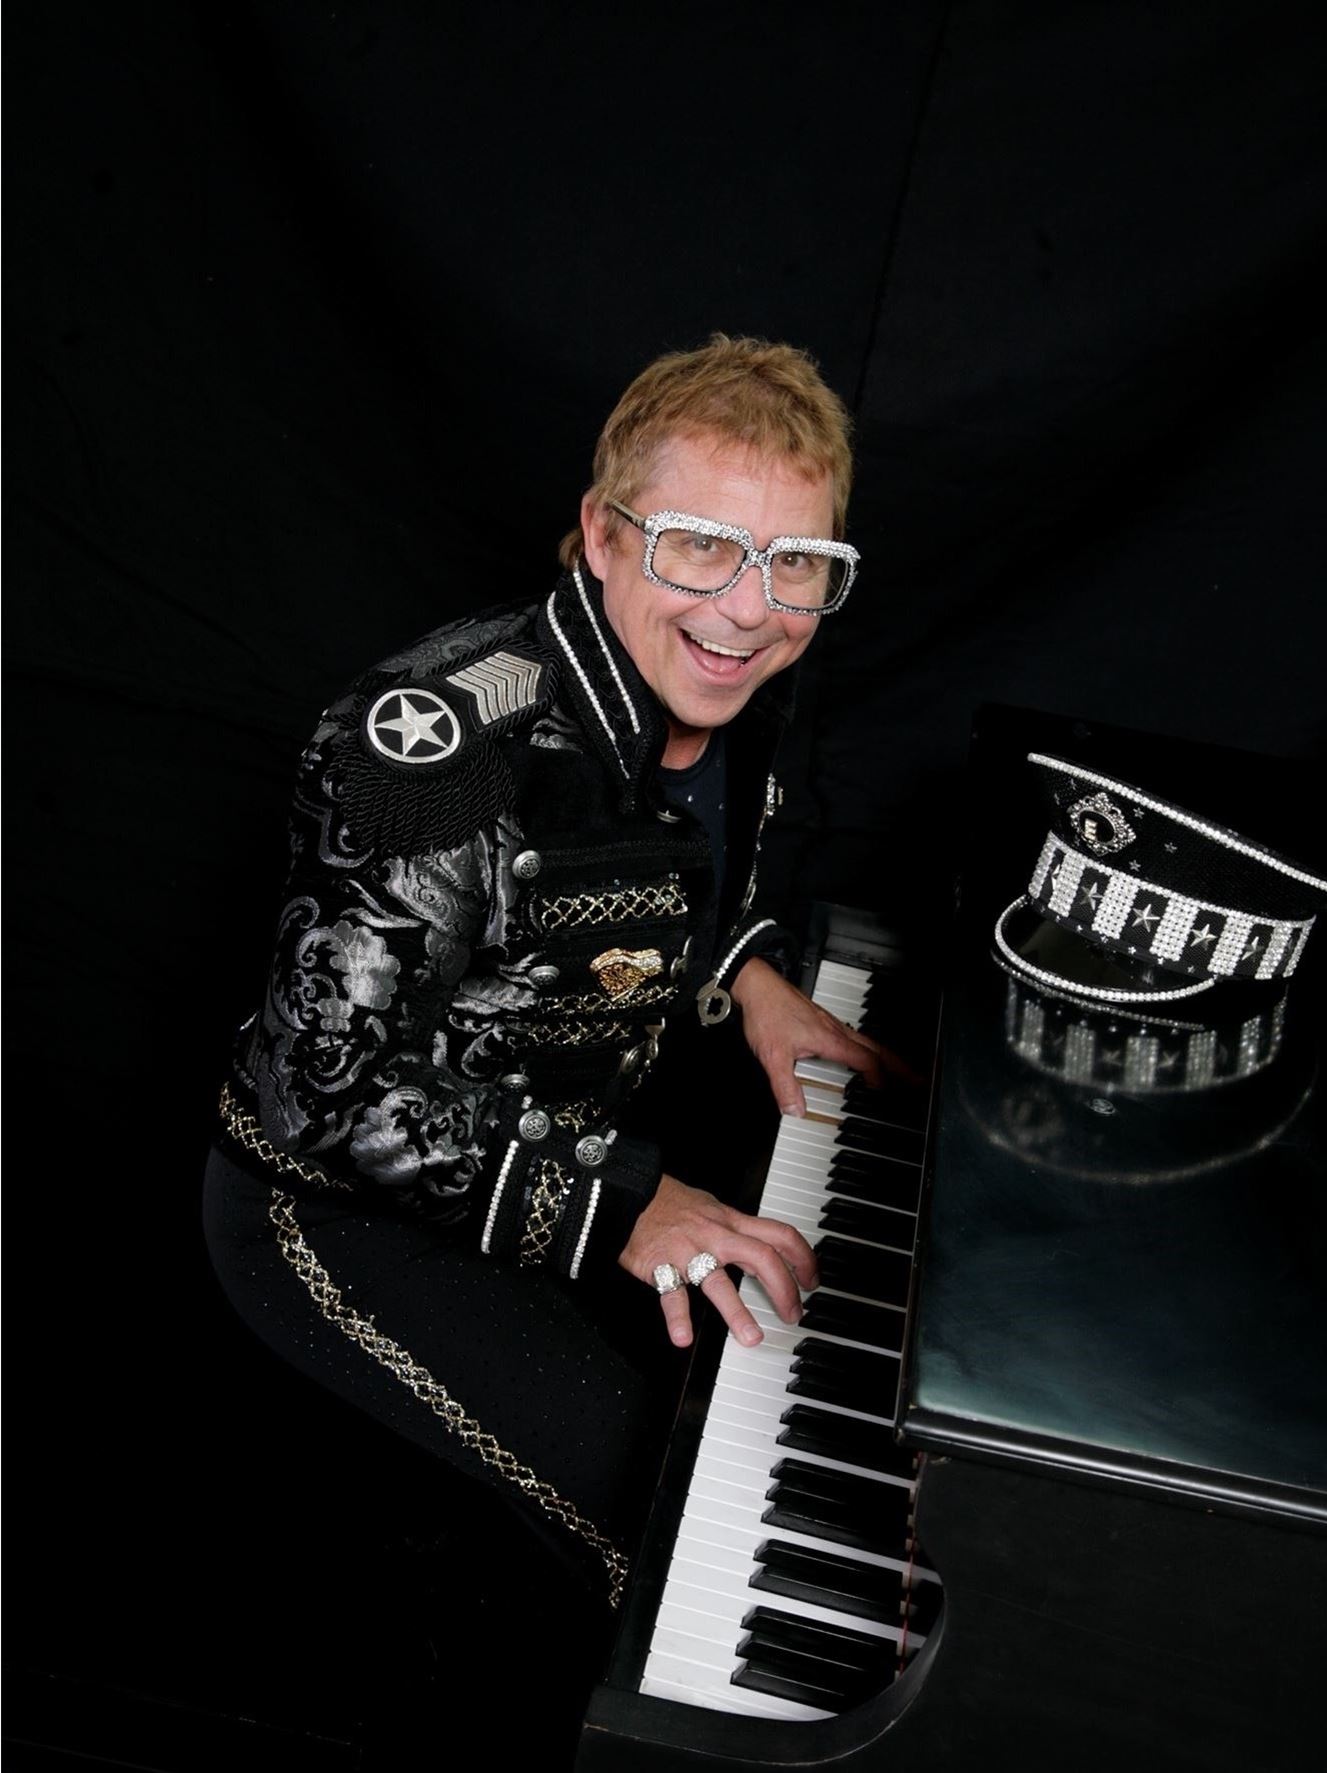 Photo: Craig A. Meyer performing as Elton John in Remember When Rock was Young tribute show